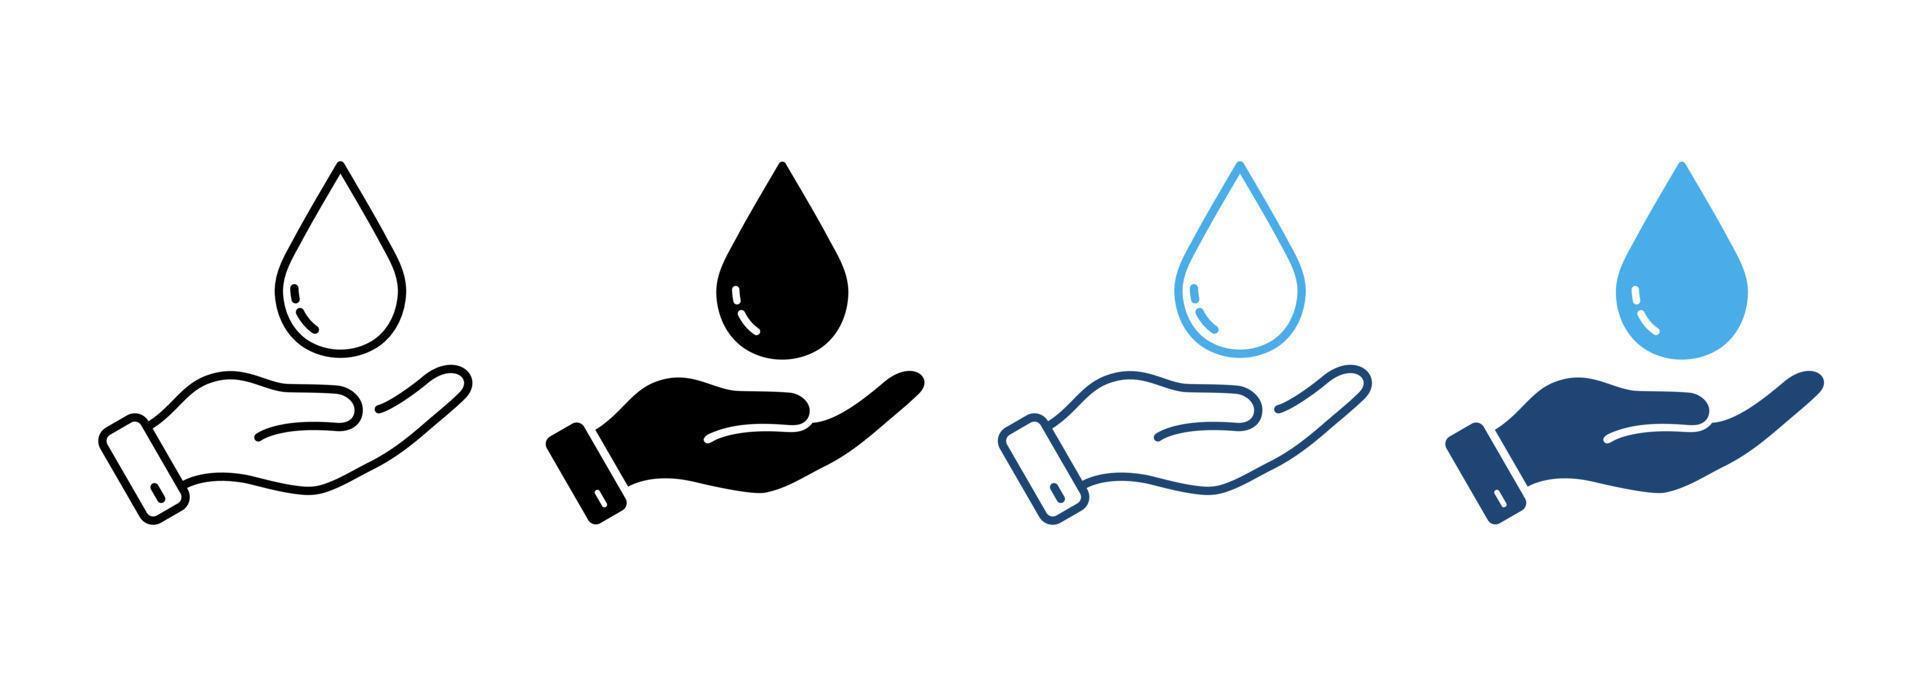 Hand Hold Water Drop Line and Silhouette Icon Color Set. Aqua Resource, Environment Protection. Hygiene Health Care, Clean Water Symbol Collection on White Background. Isolated Vector Illustration.